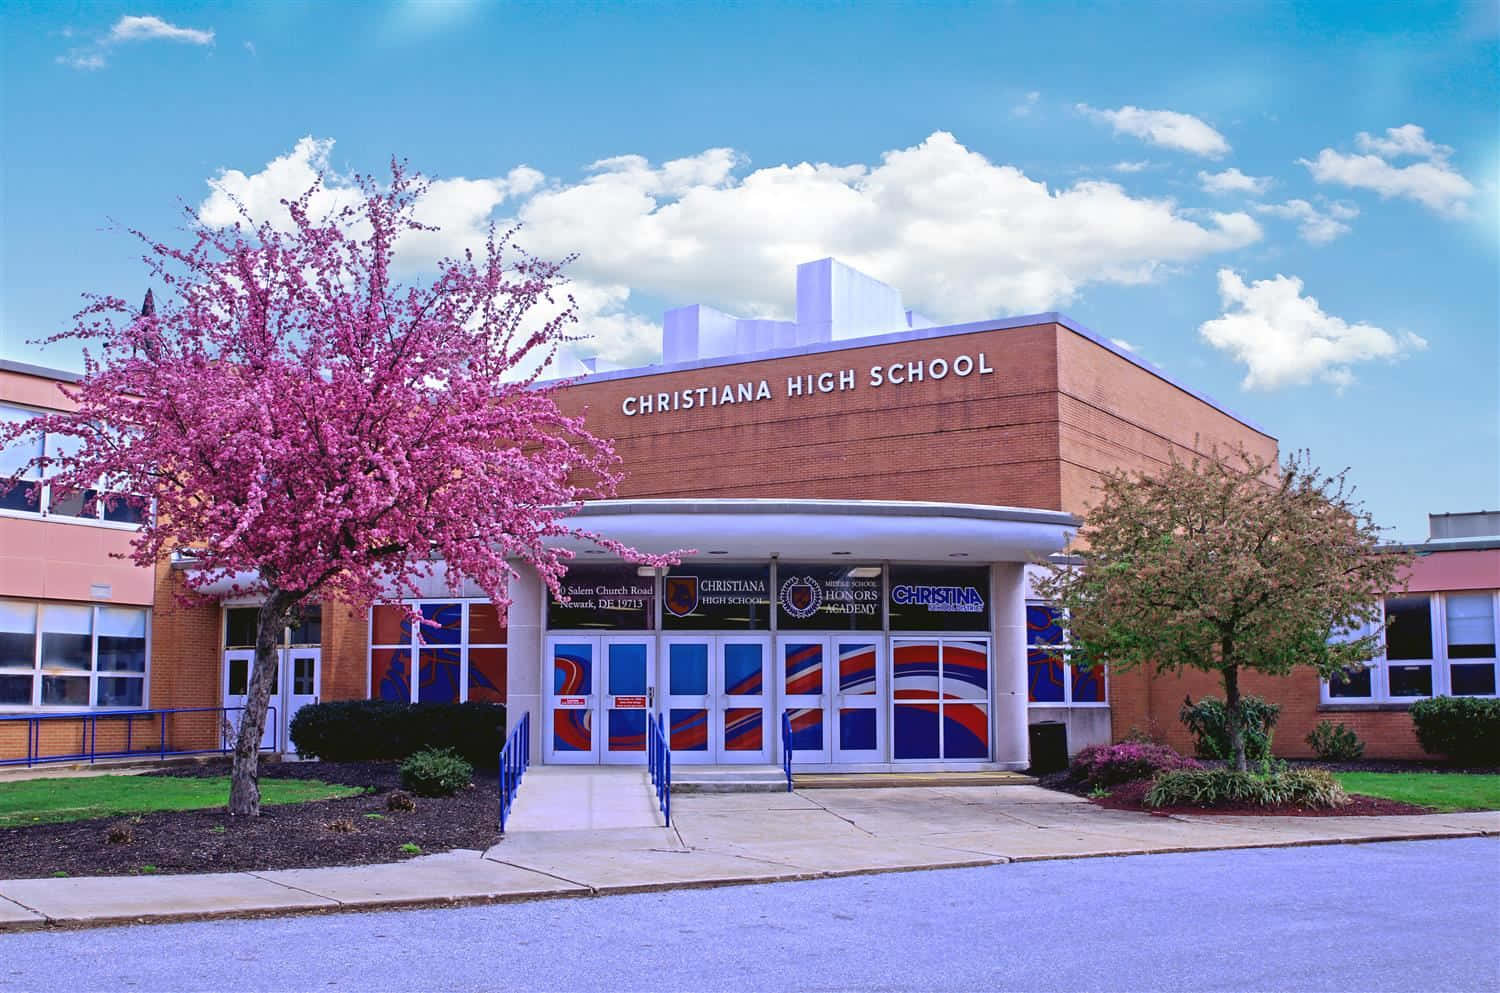 A School Building With A Blue And White Color Scheme